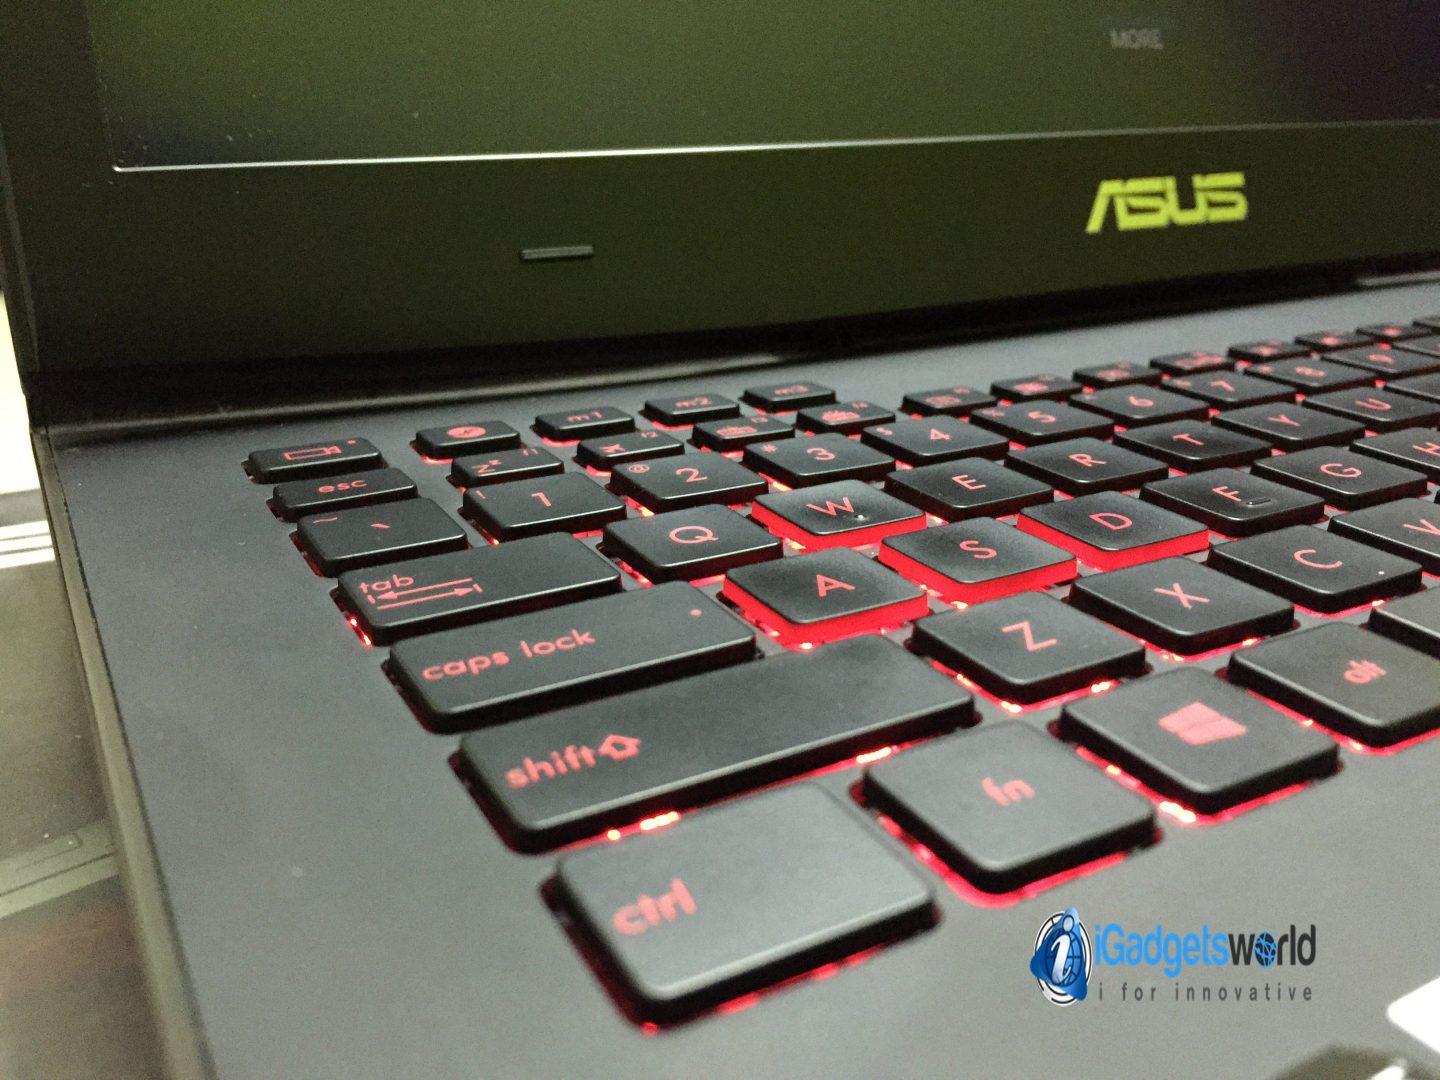 Asus ROG G751J Review: A Slightly Overpriced Ultra High-End Gaming Laptop - 23